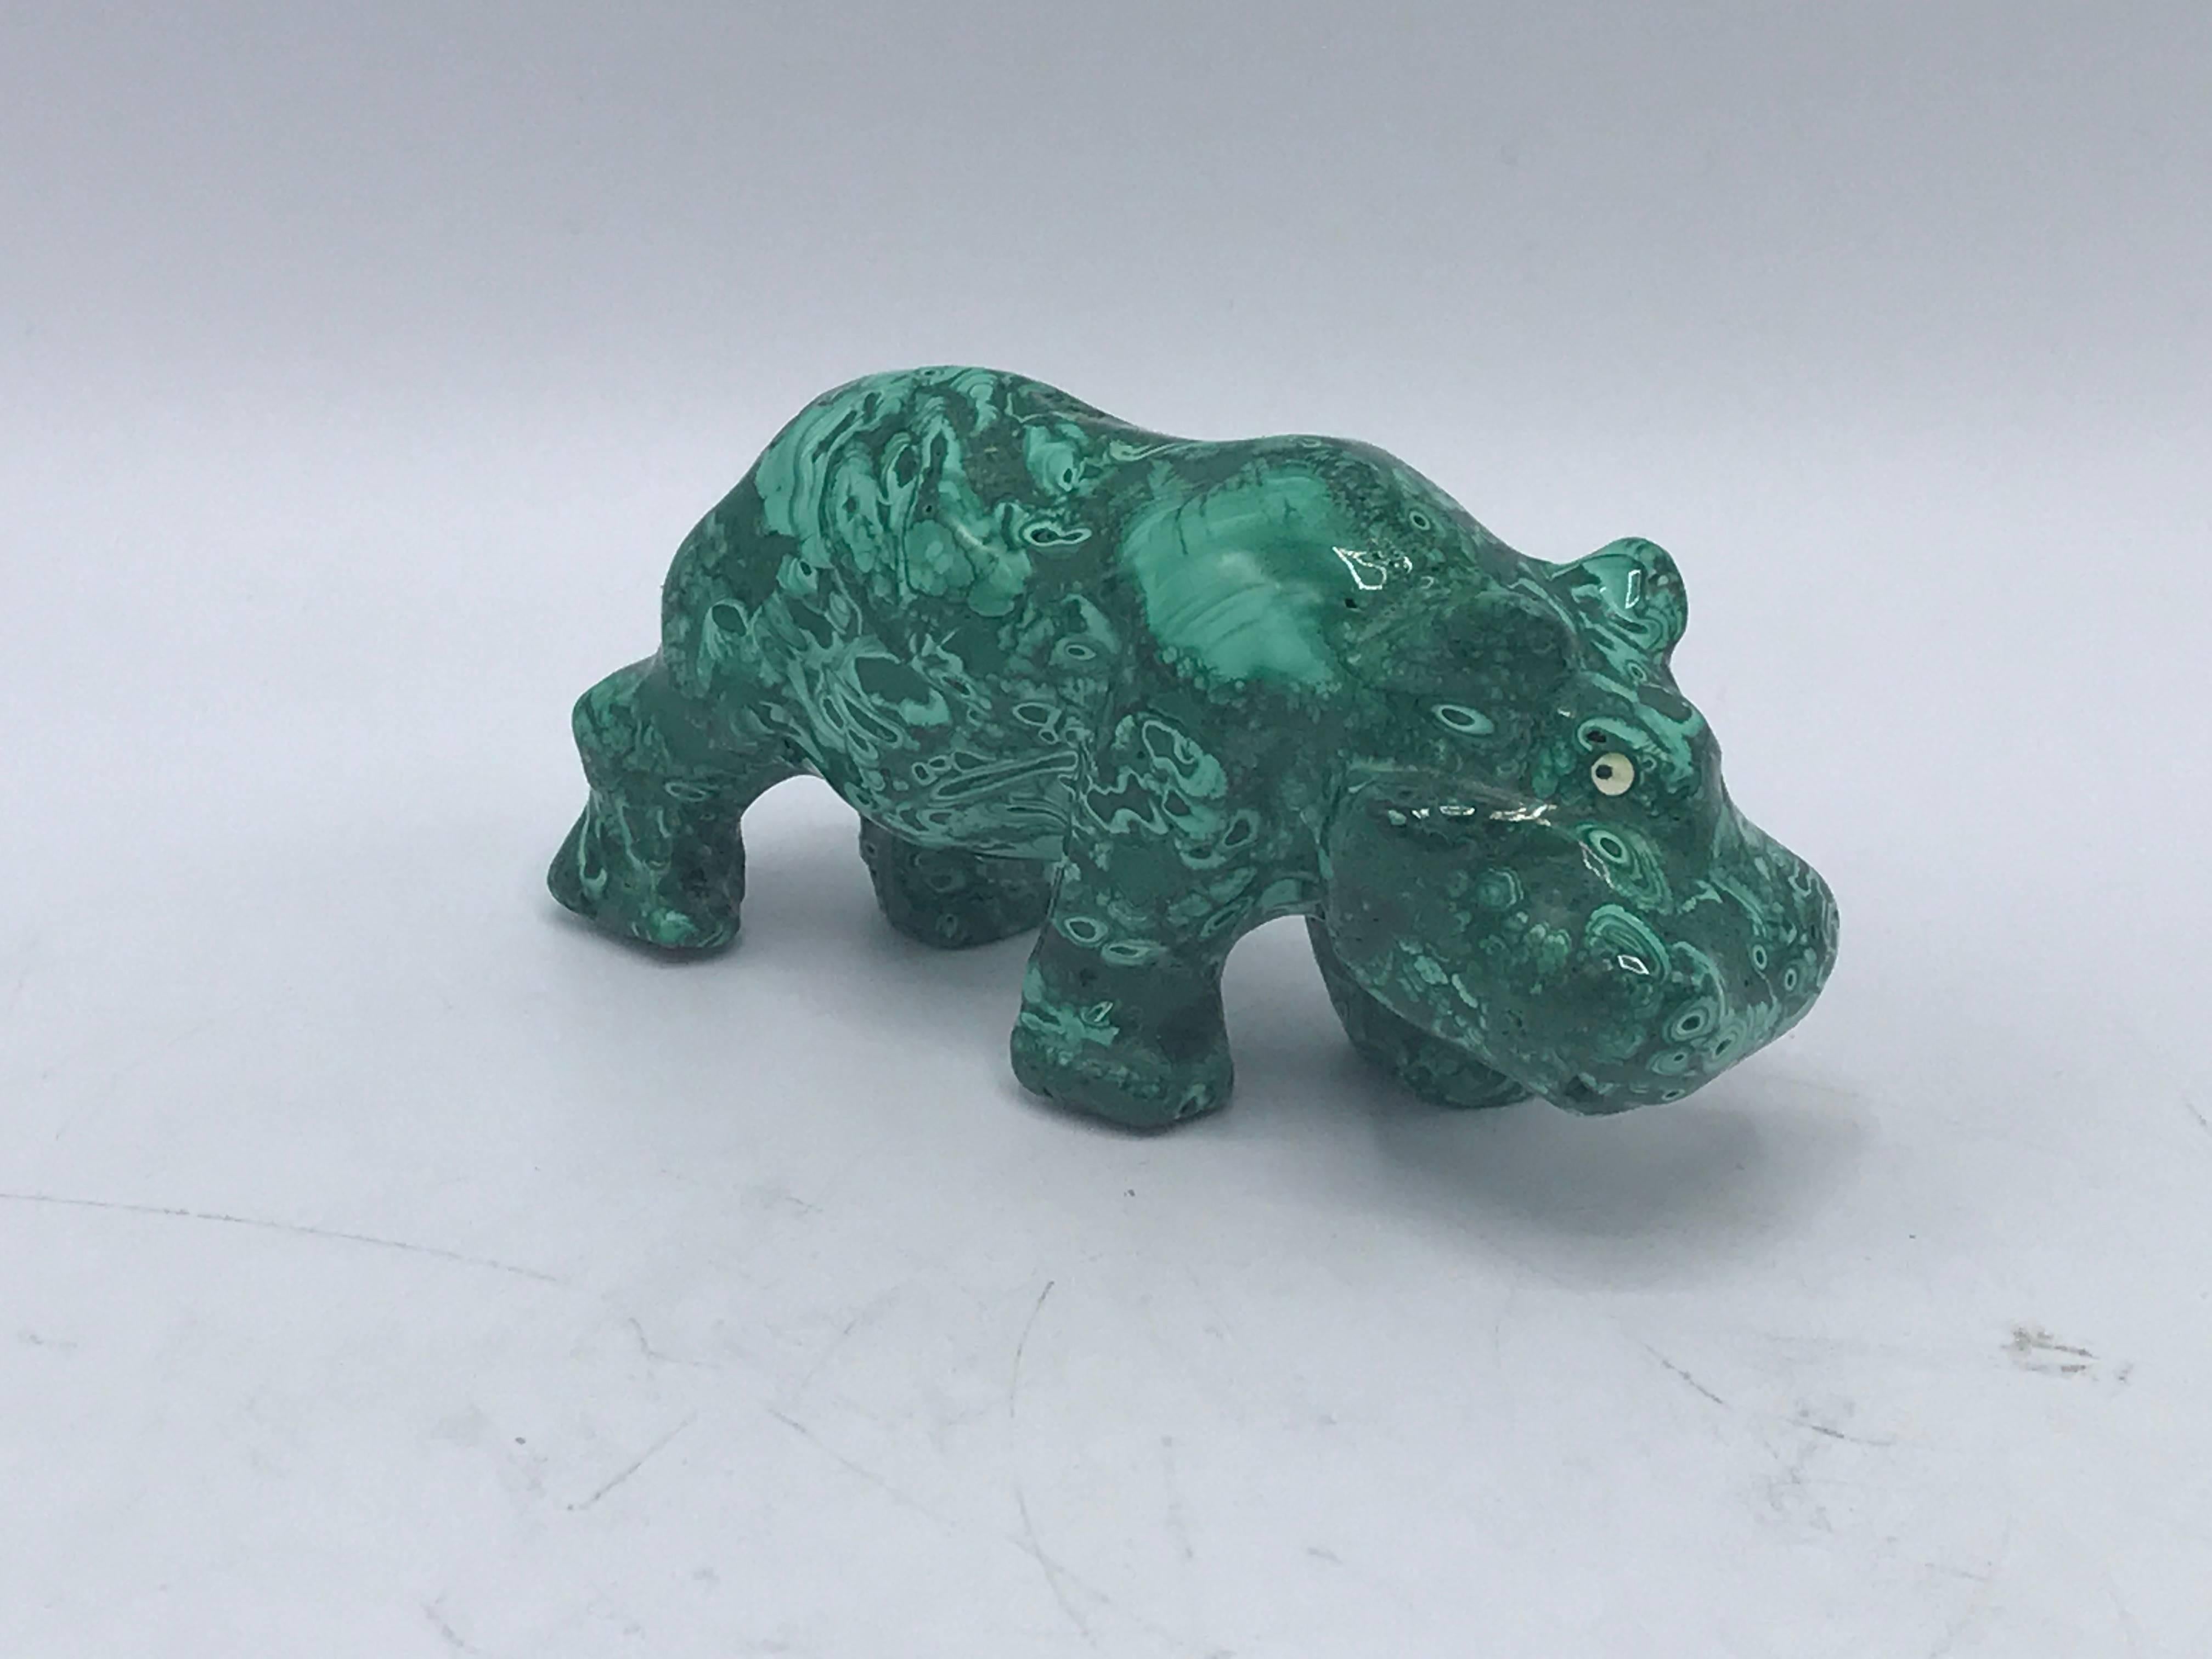 Offered is a gorgeous, 1960s solid-malachite hippopotamus sculpture.